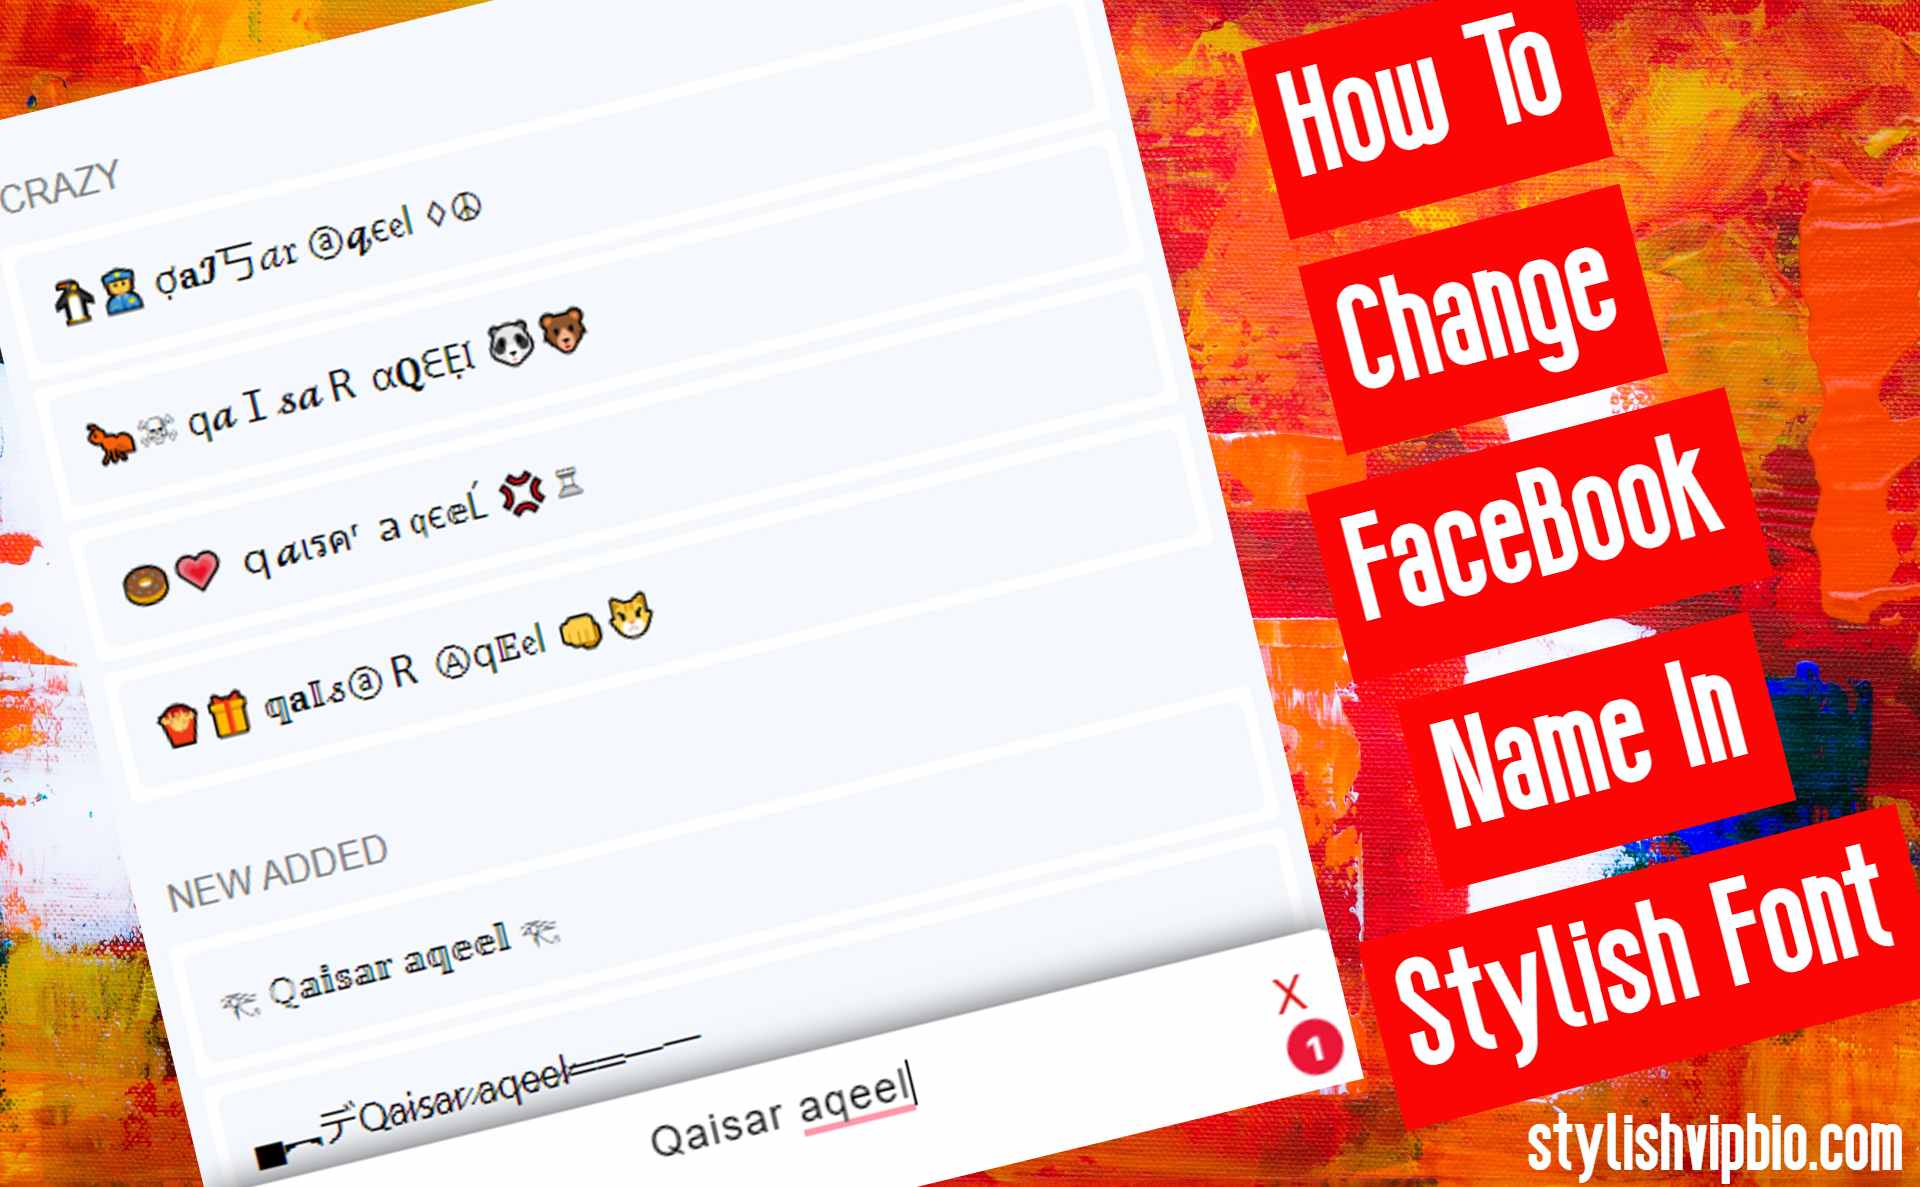 How To Change FaceBook Name In Stylish Font